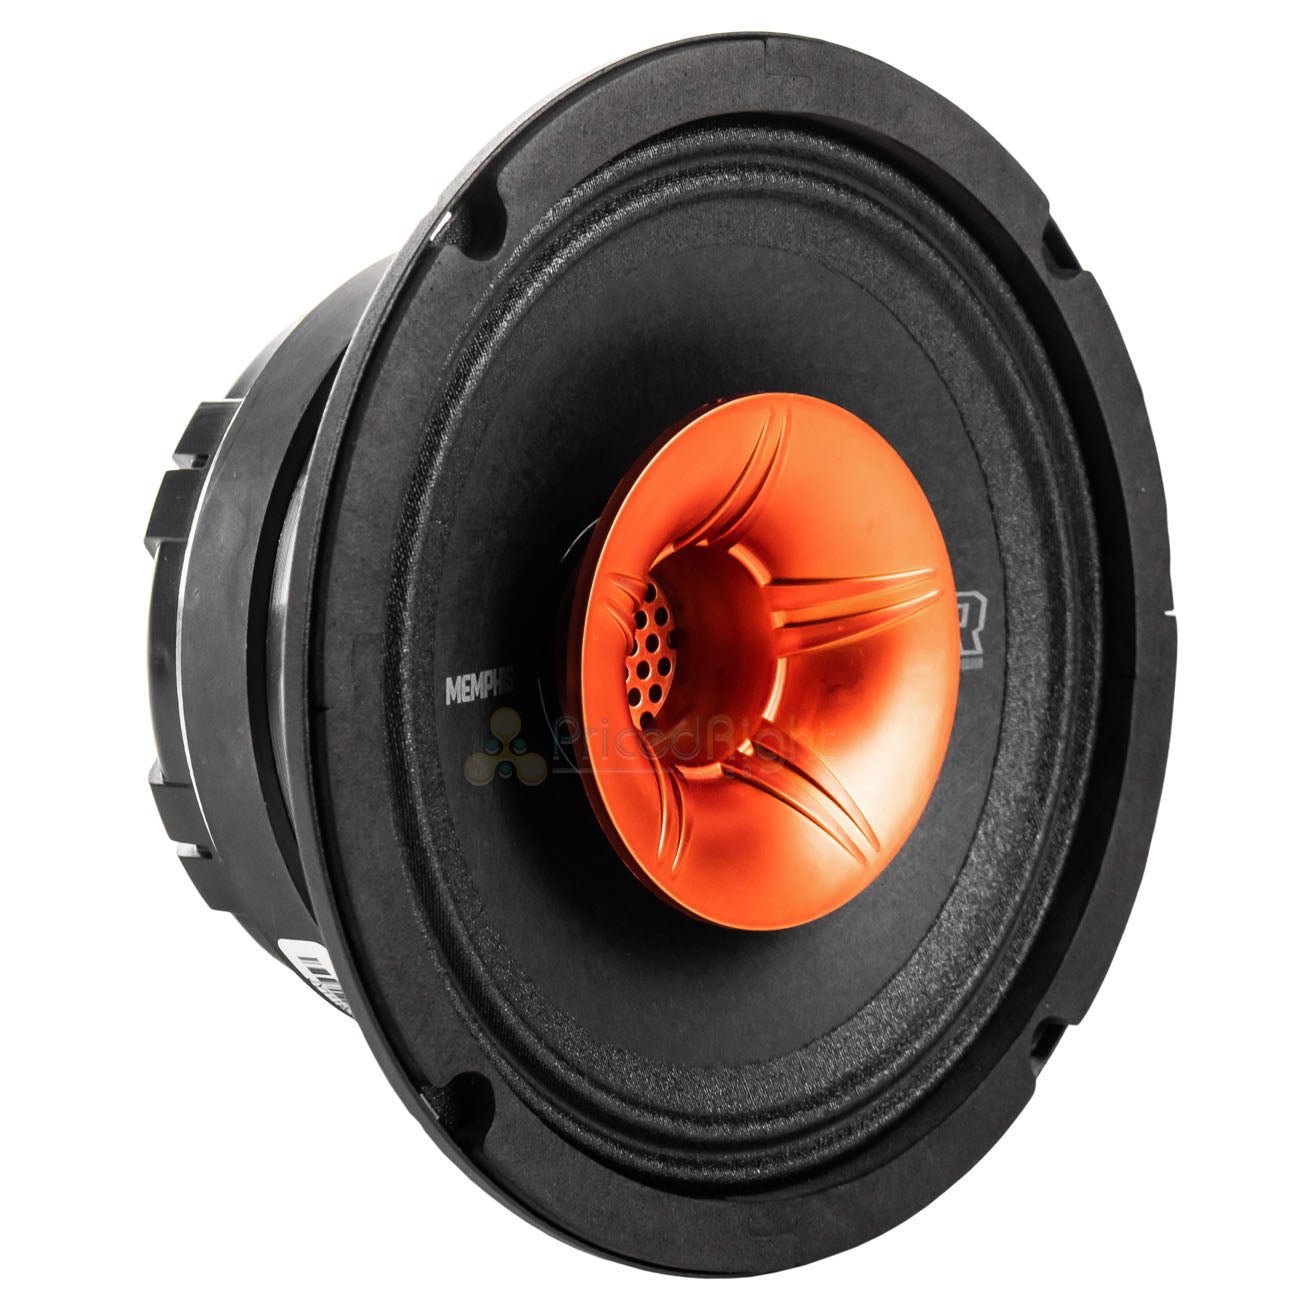 2 Pack Memphis Audio 6.5" Coaxial Speakers 250W Max Street Reference SRXP62WT